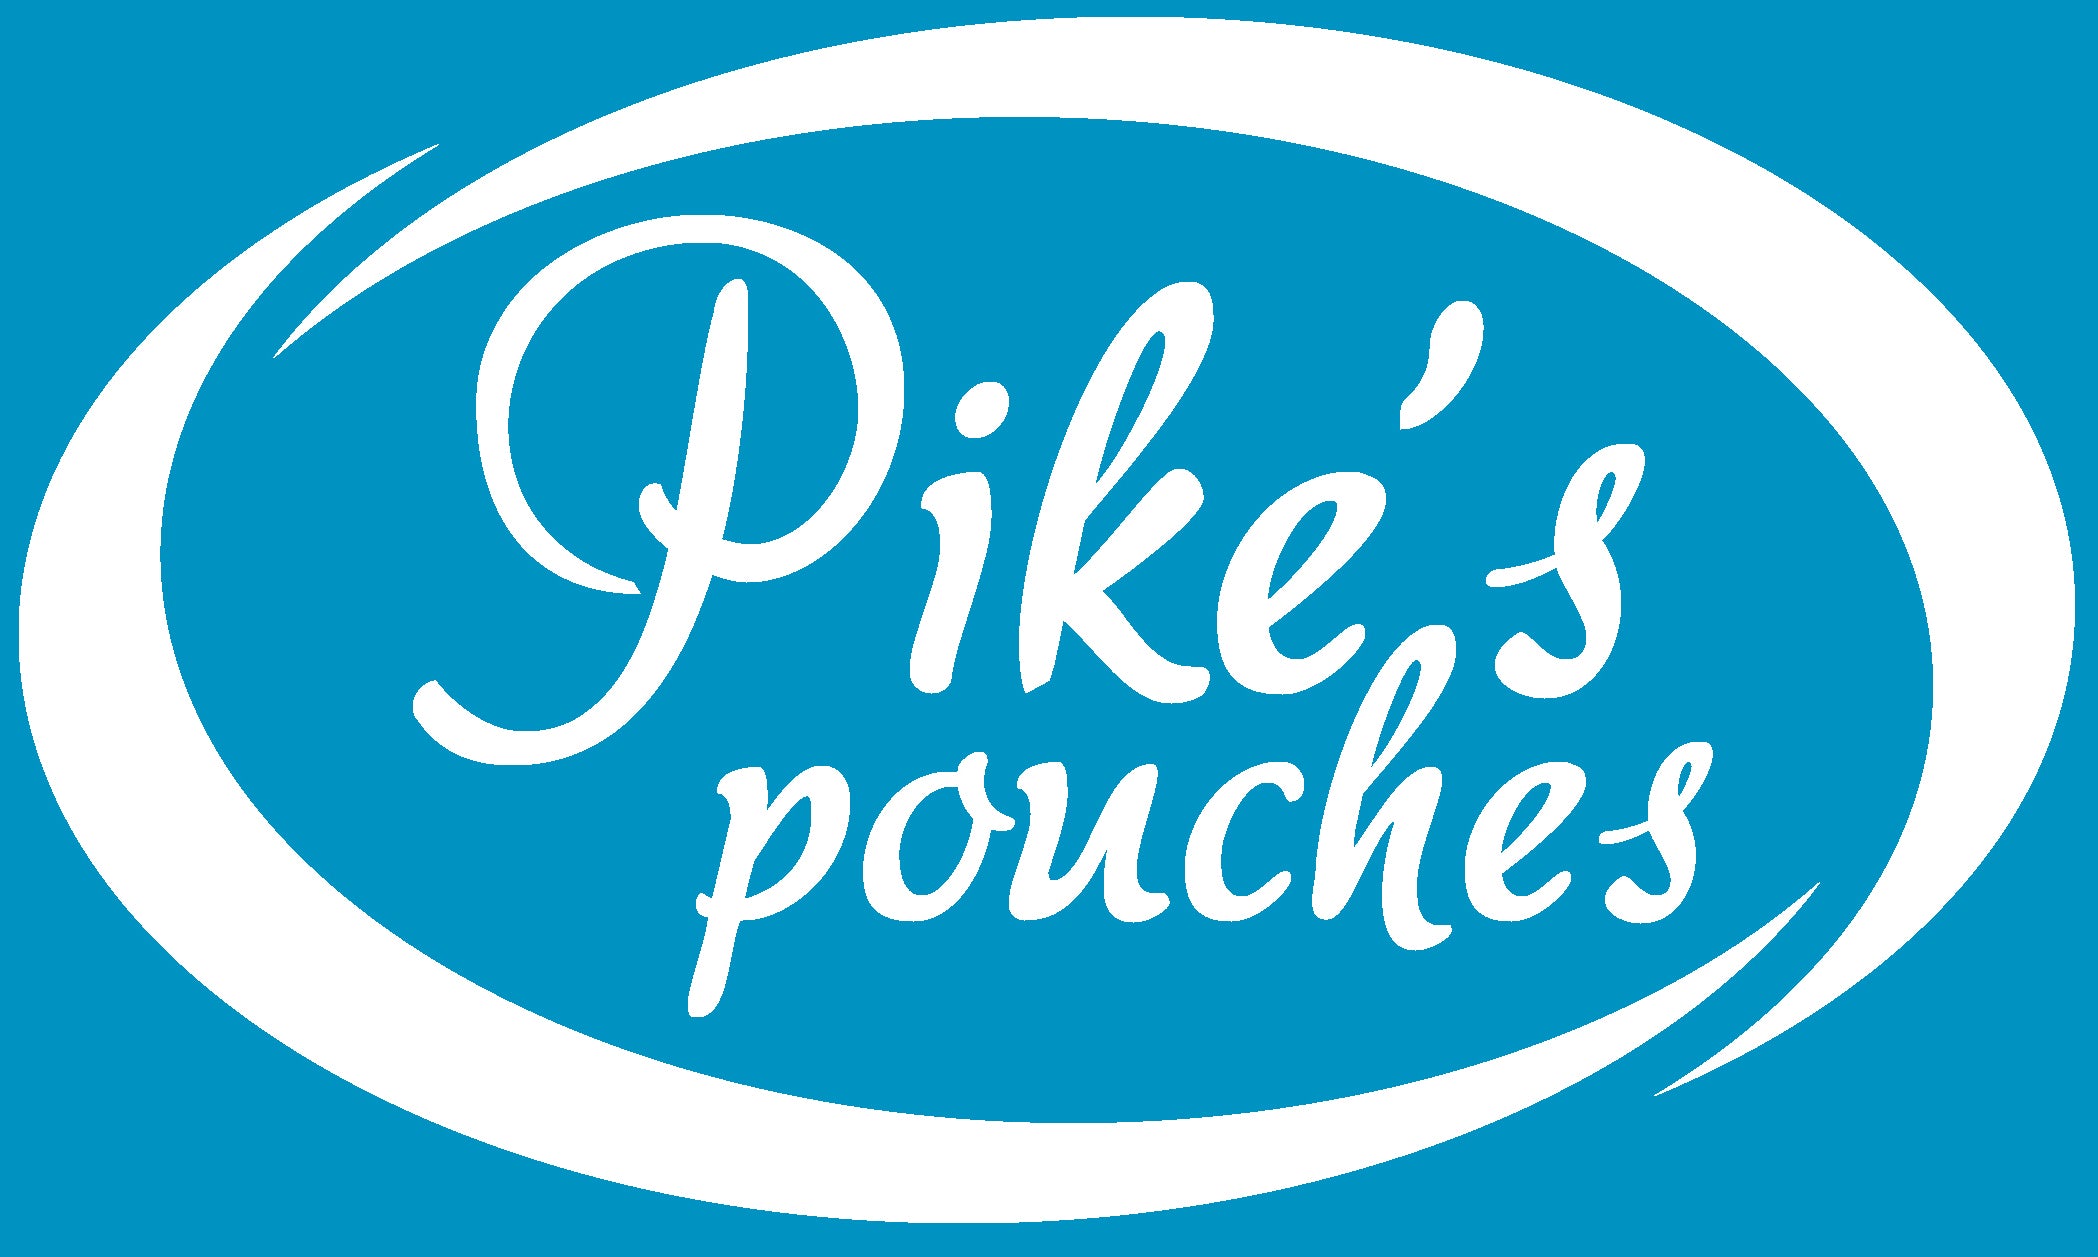 Pikes Pouches